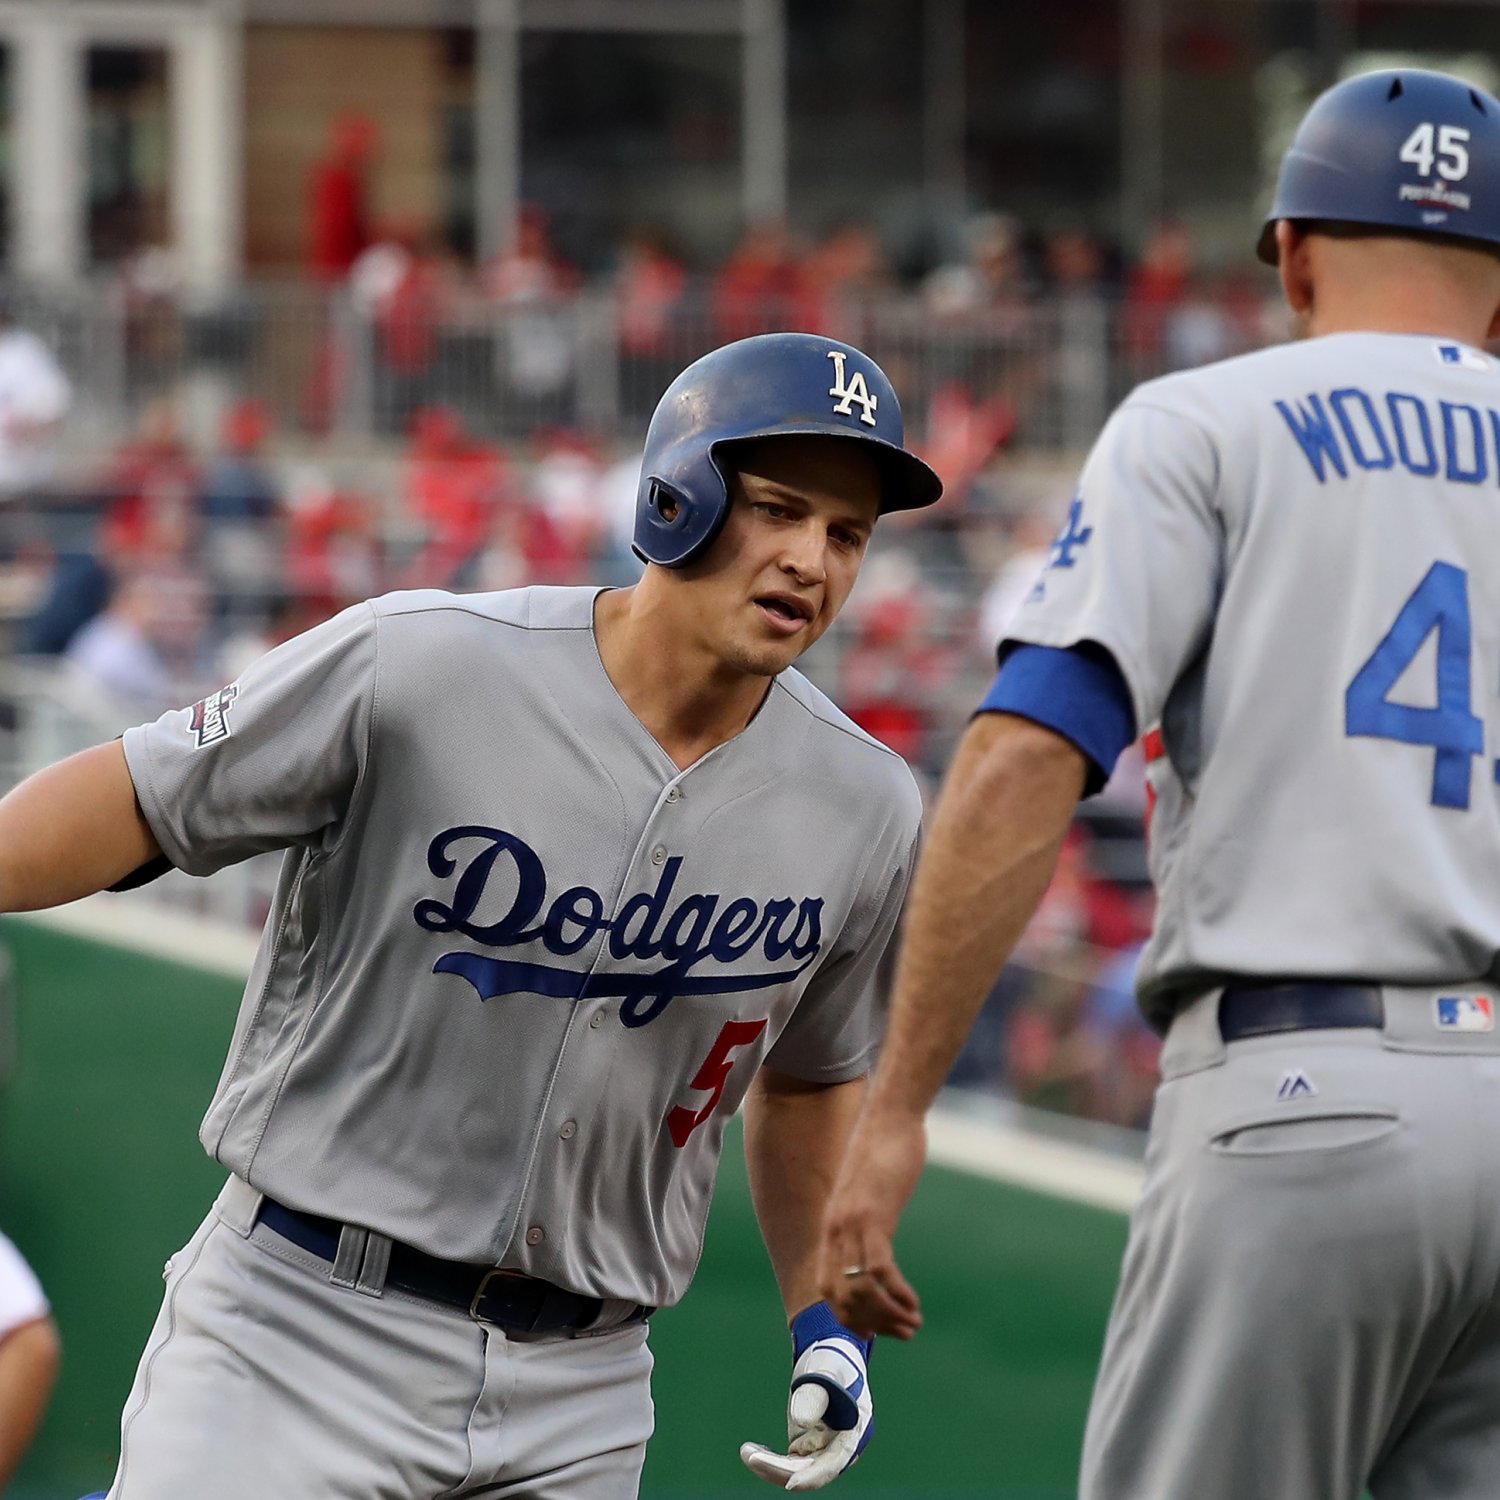 Nationals vs. Dodgers NLDS Game 3 Live Score and Highlights Bleacher